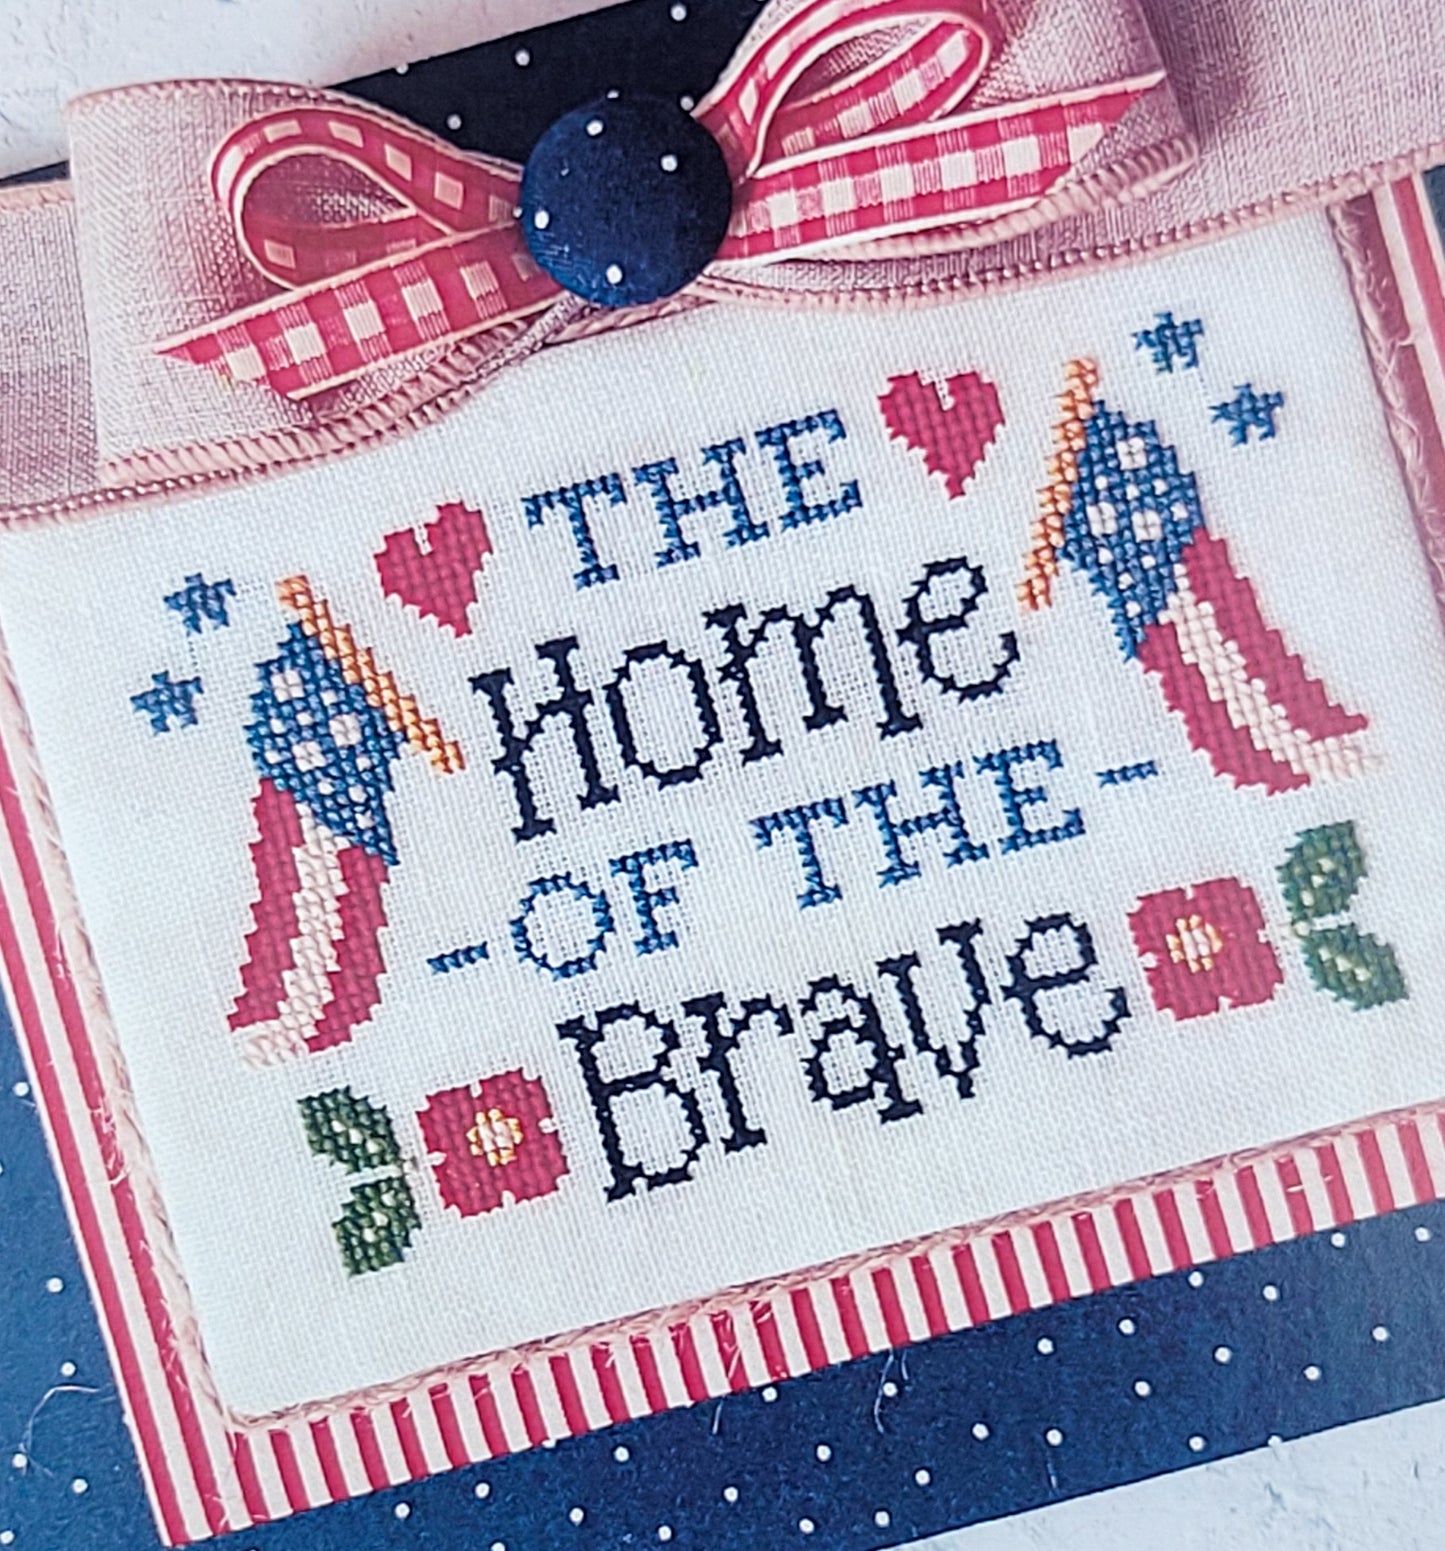 The Home of the Brave